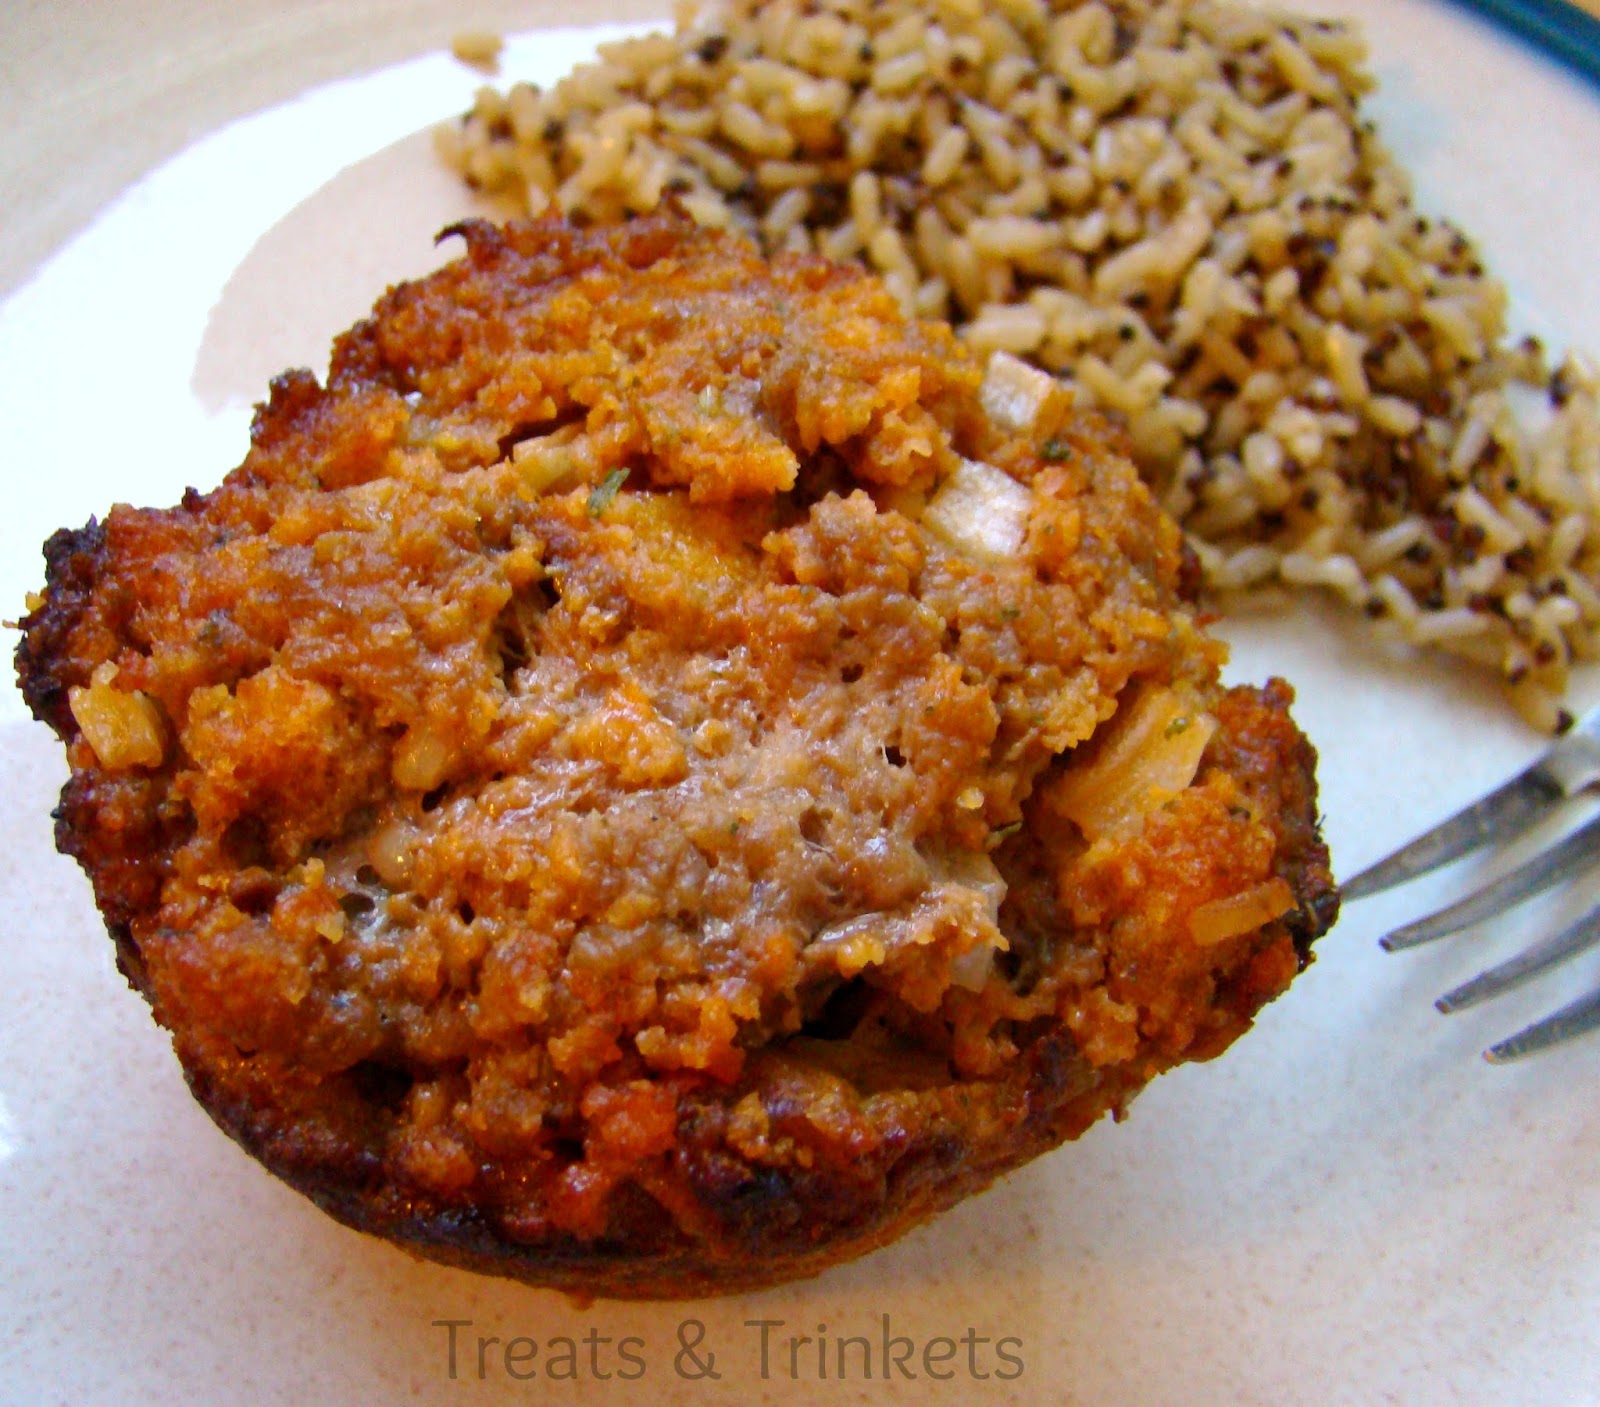 Treats & Trinkets: Individual Cheater's Meatloaf